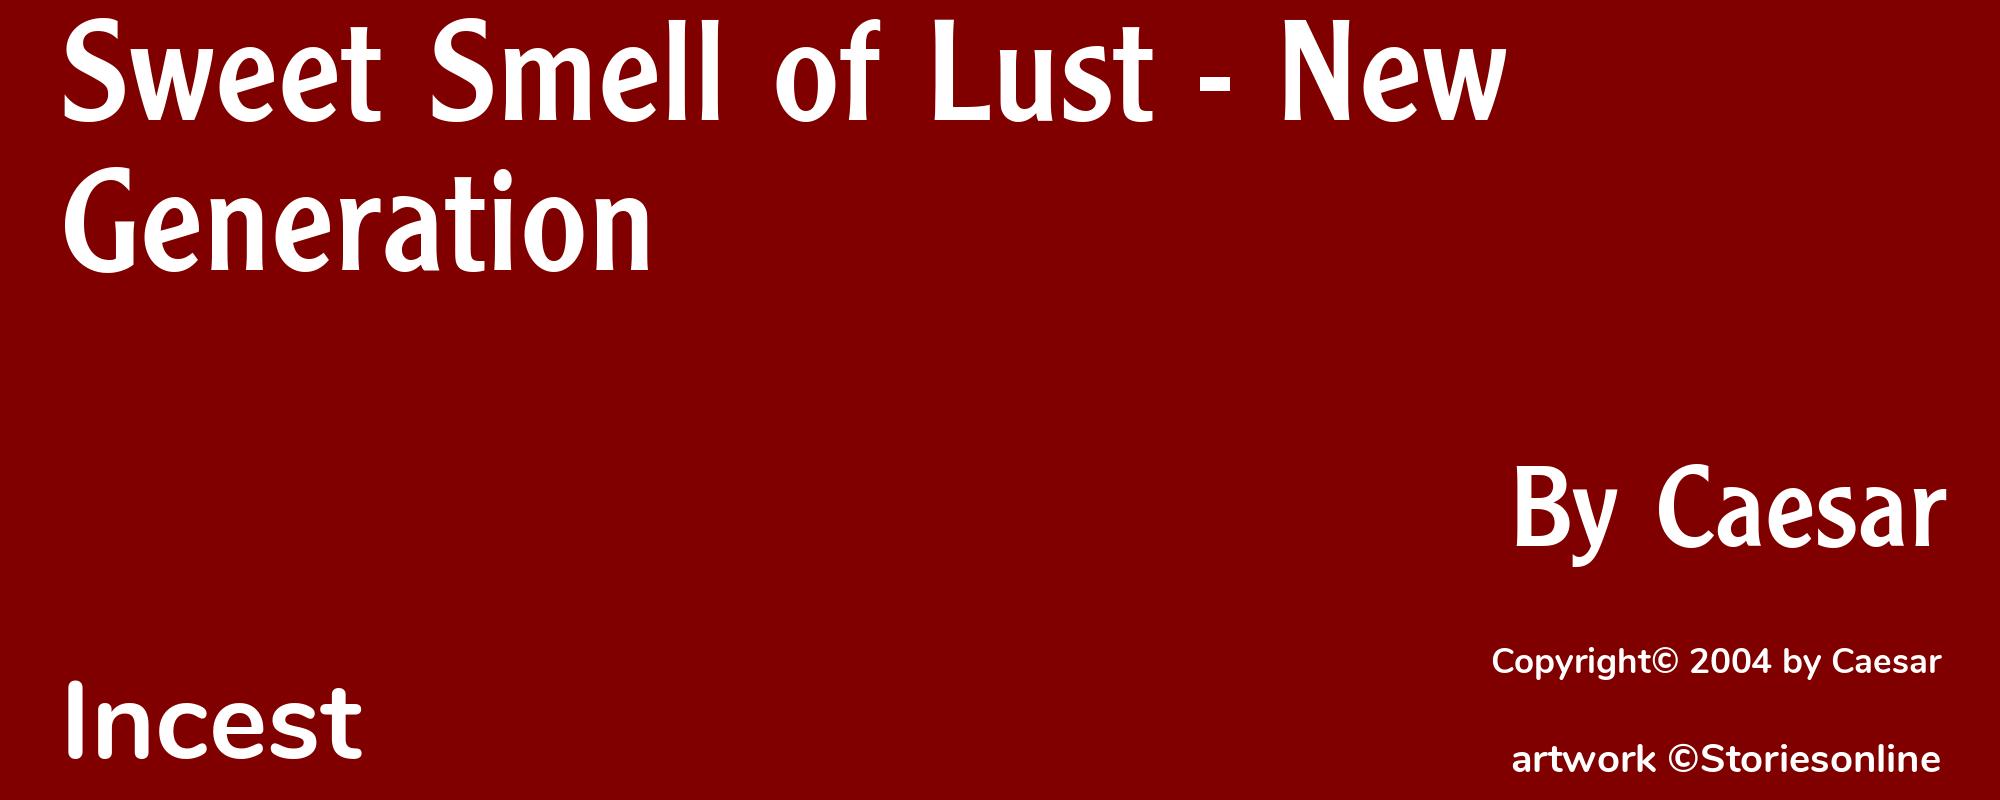 Sweet Smell of Lust - New Generation - Cover